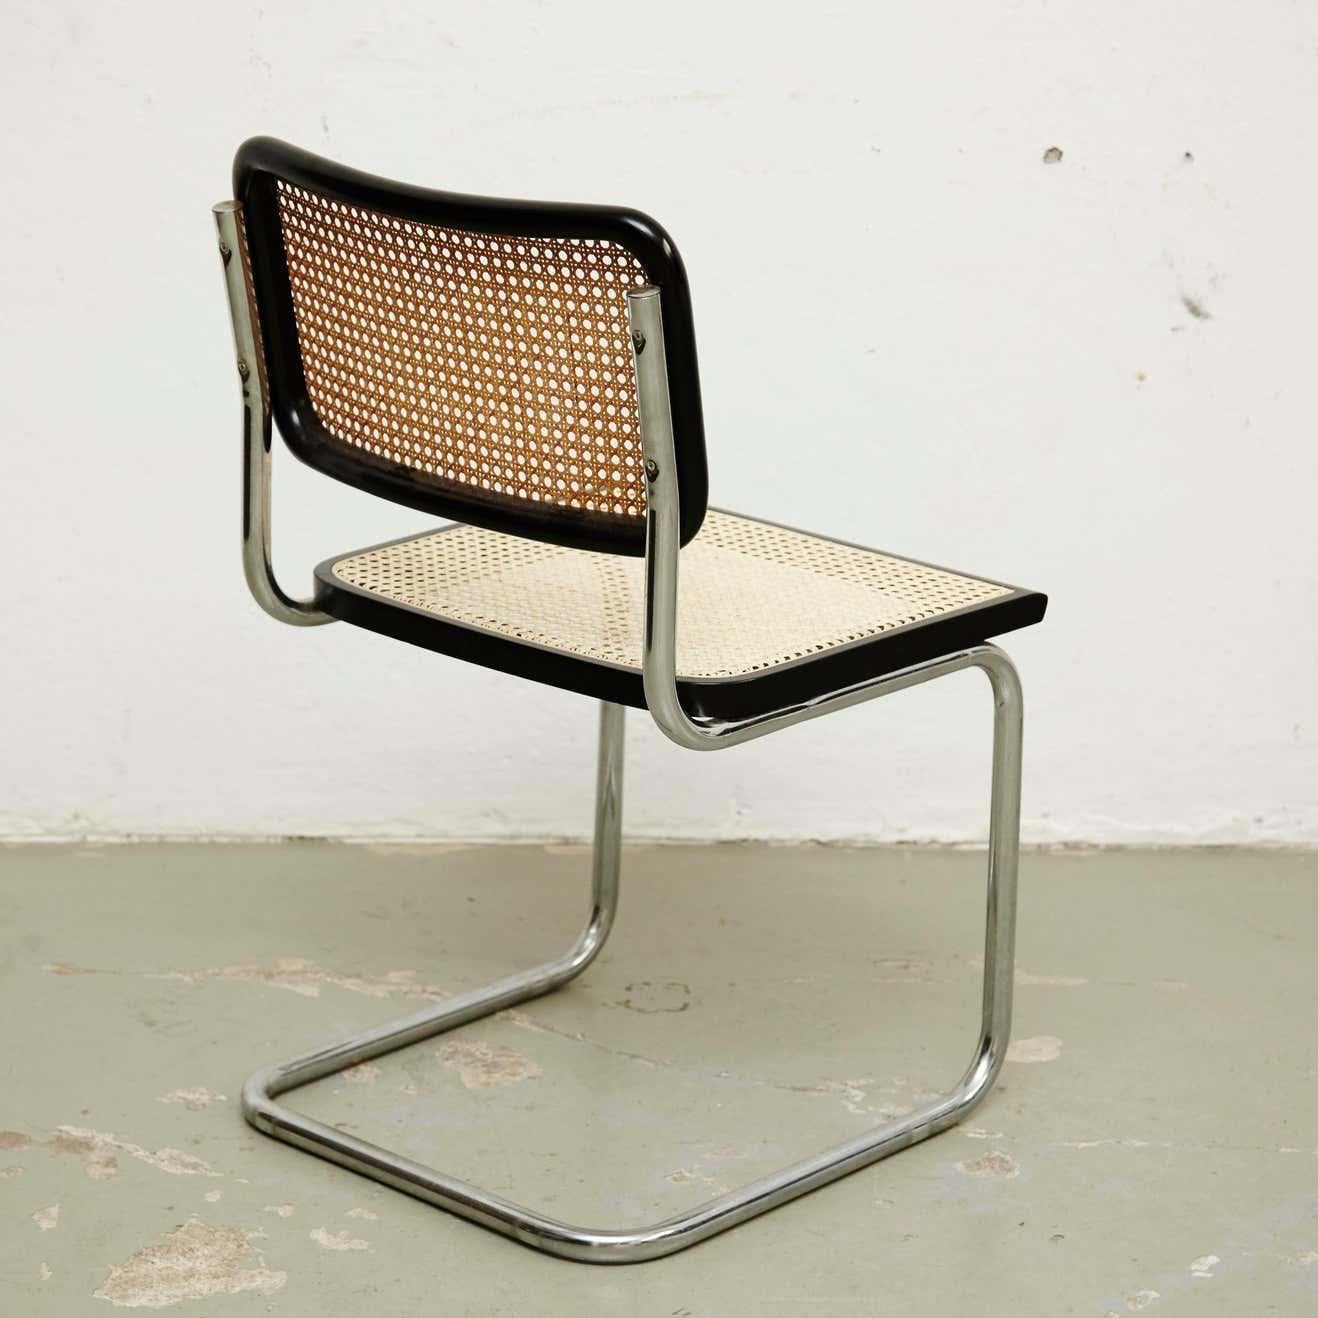 Chair, model Cesca, designed by Marcel Breuer around 1970, manufactured in Italy.
Metal pipe frame, wood seat and back structure and rattan.

 In good condition, with minor wear consistent with age and use, preserving a beautiful patina. The seat